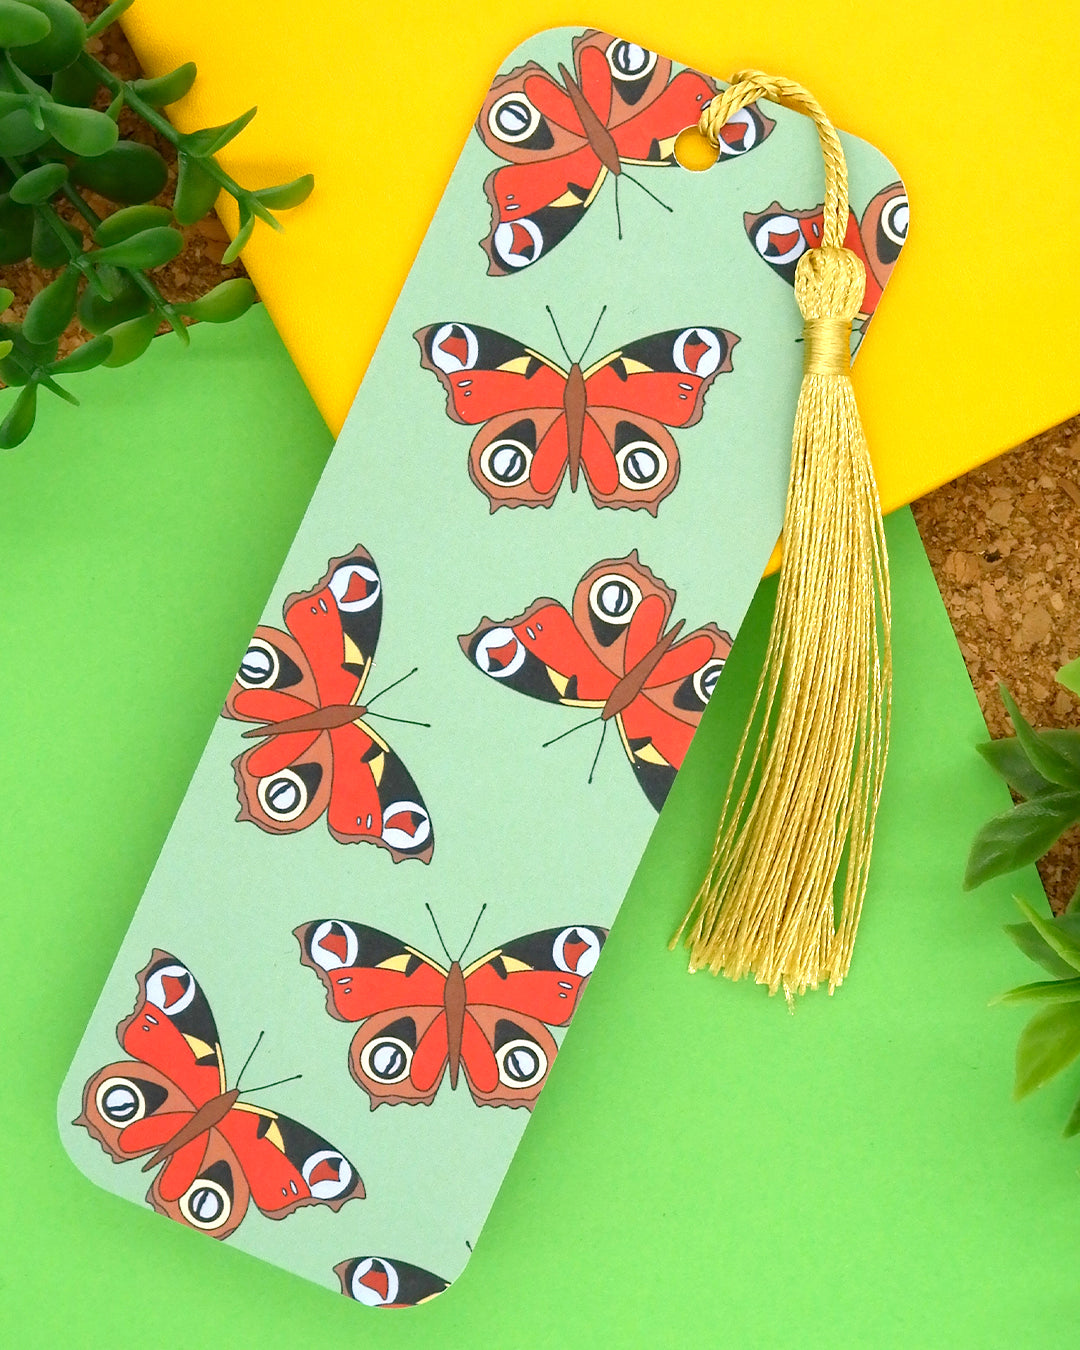 Peacock Butterfly Bookmark